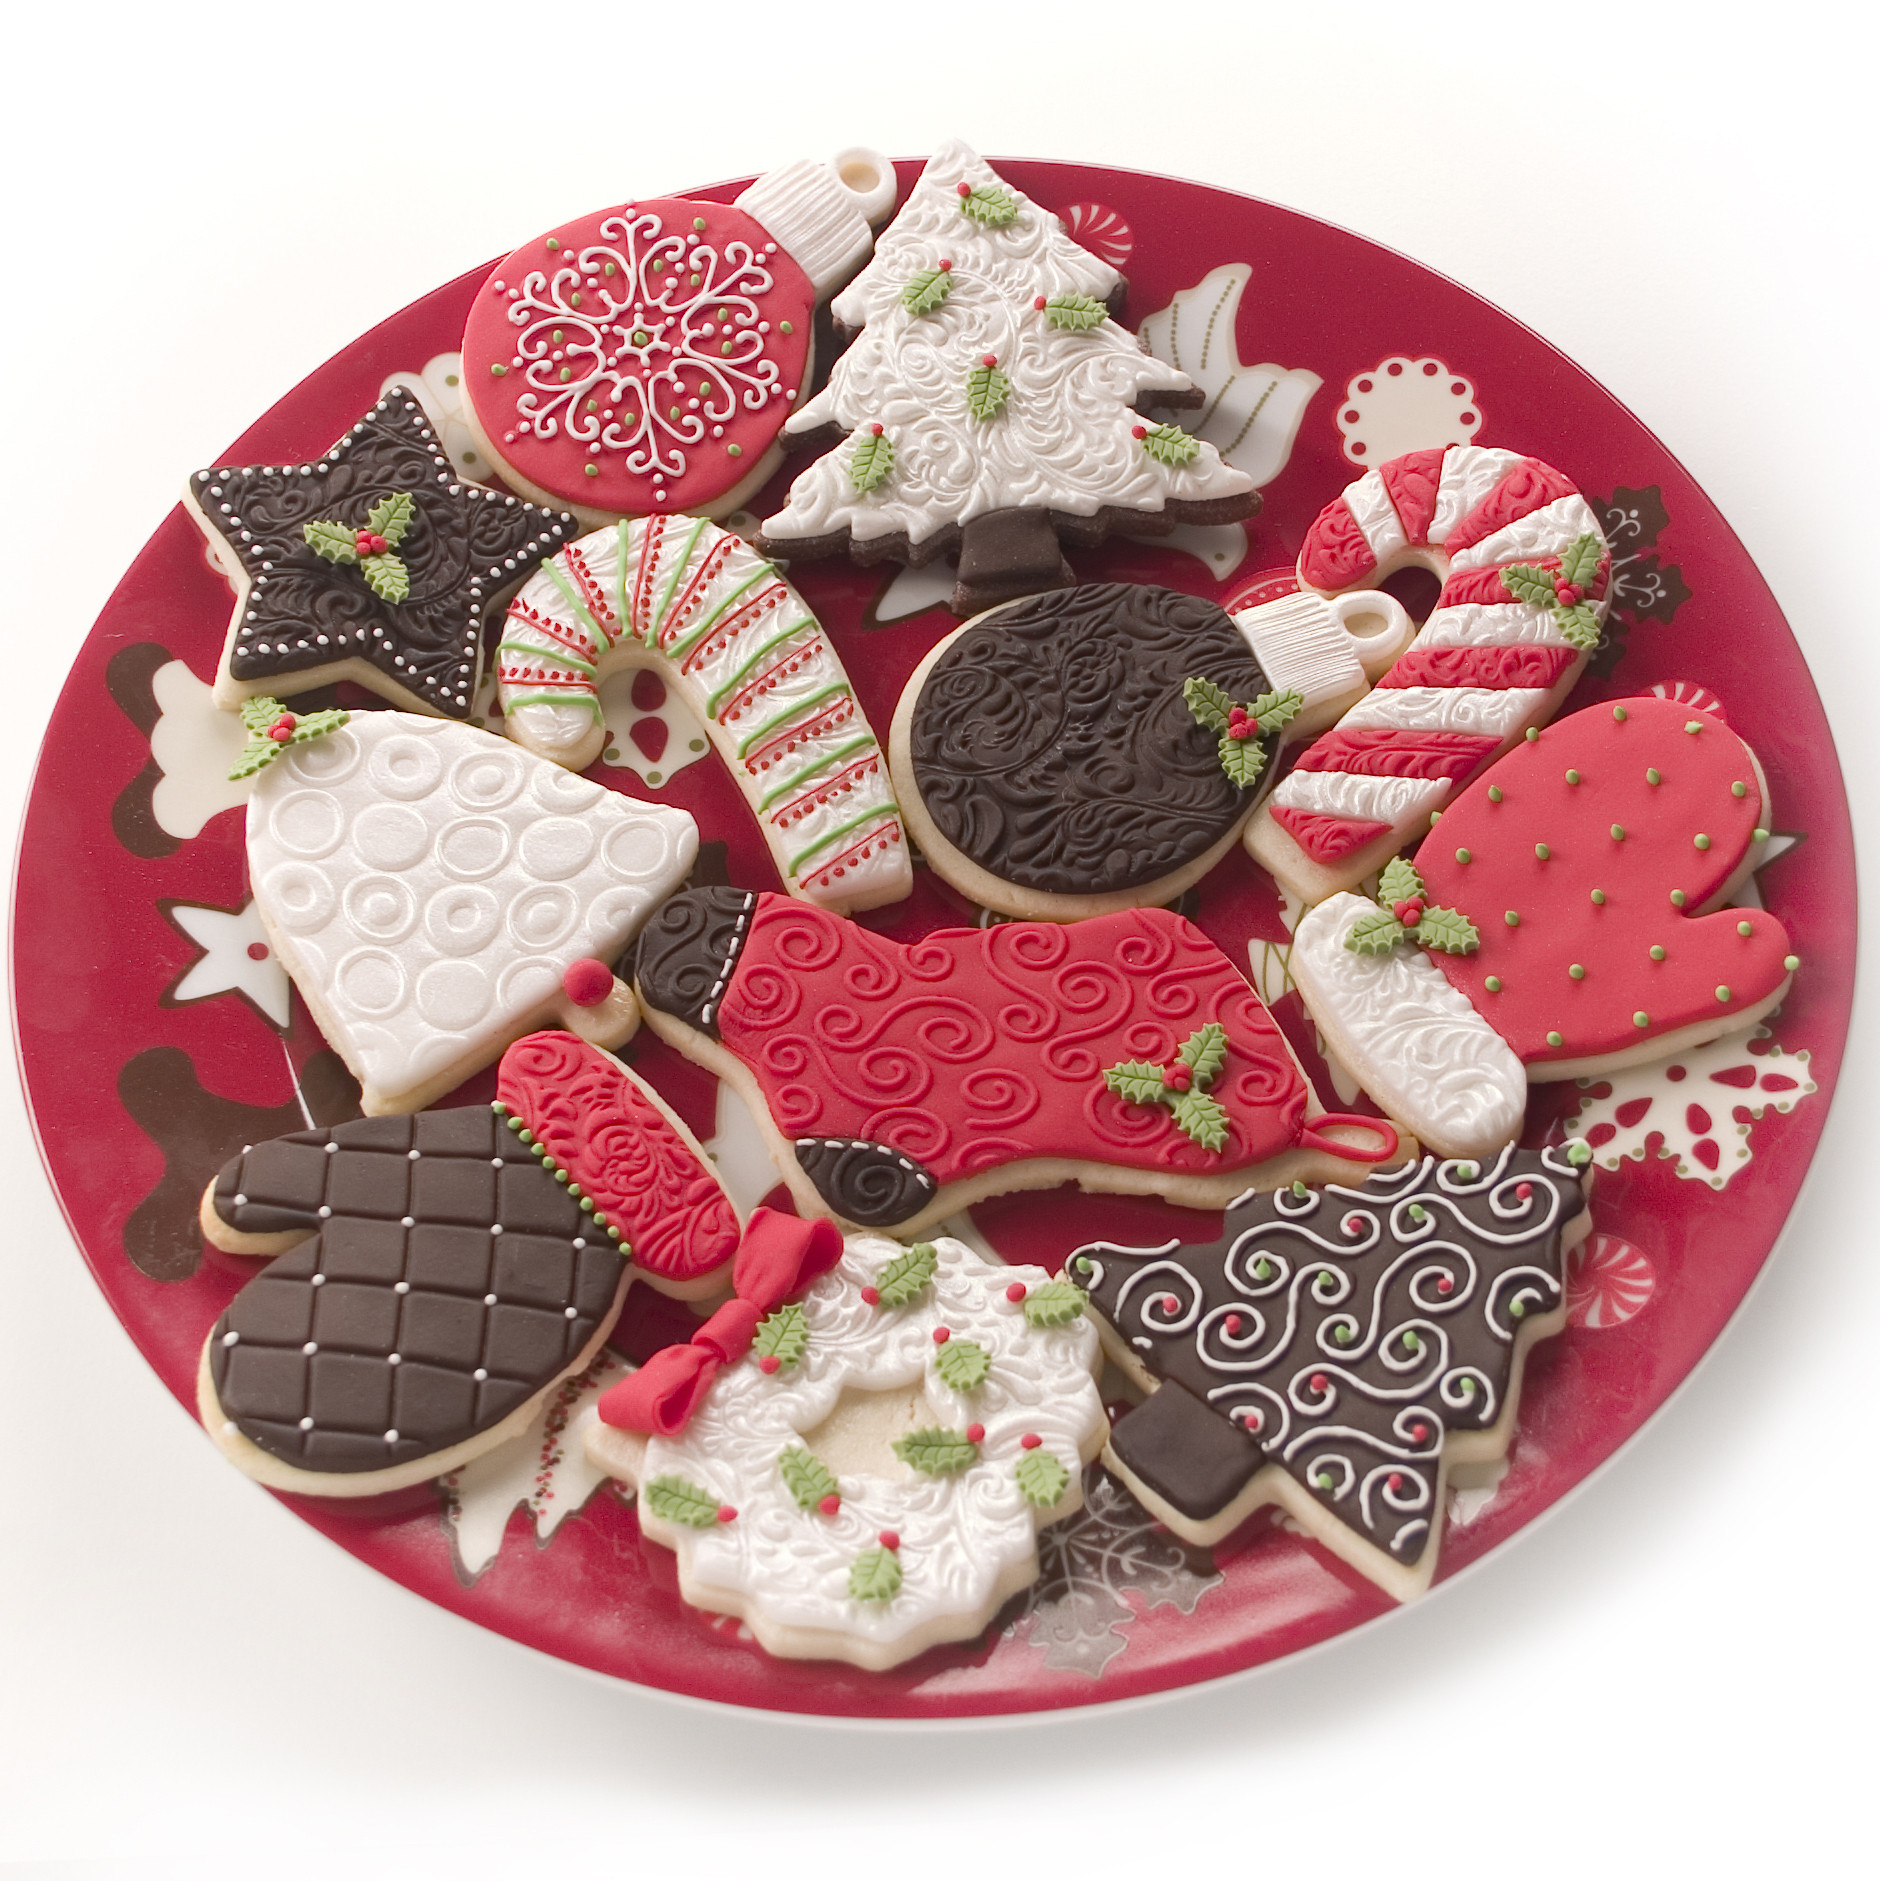 Decorate Christmas Cookies
 Holiday cookies